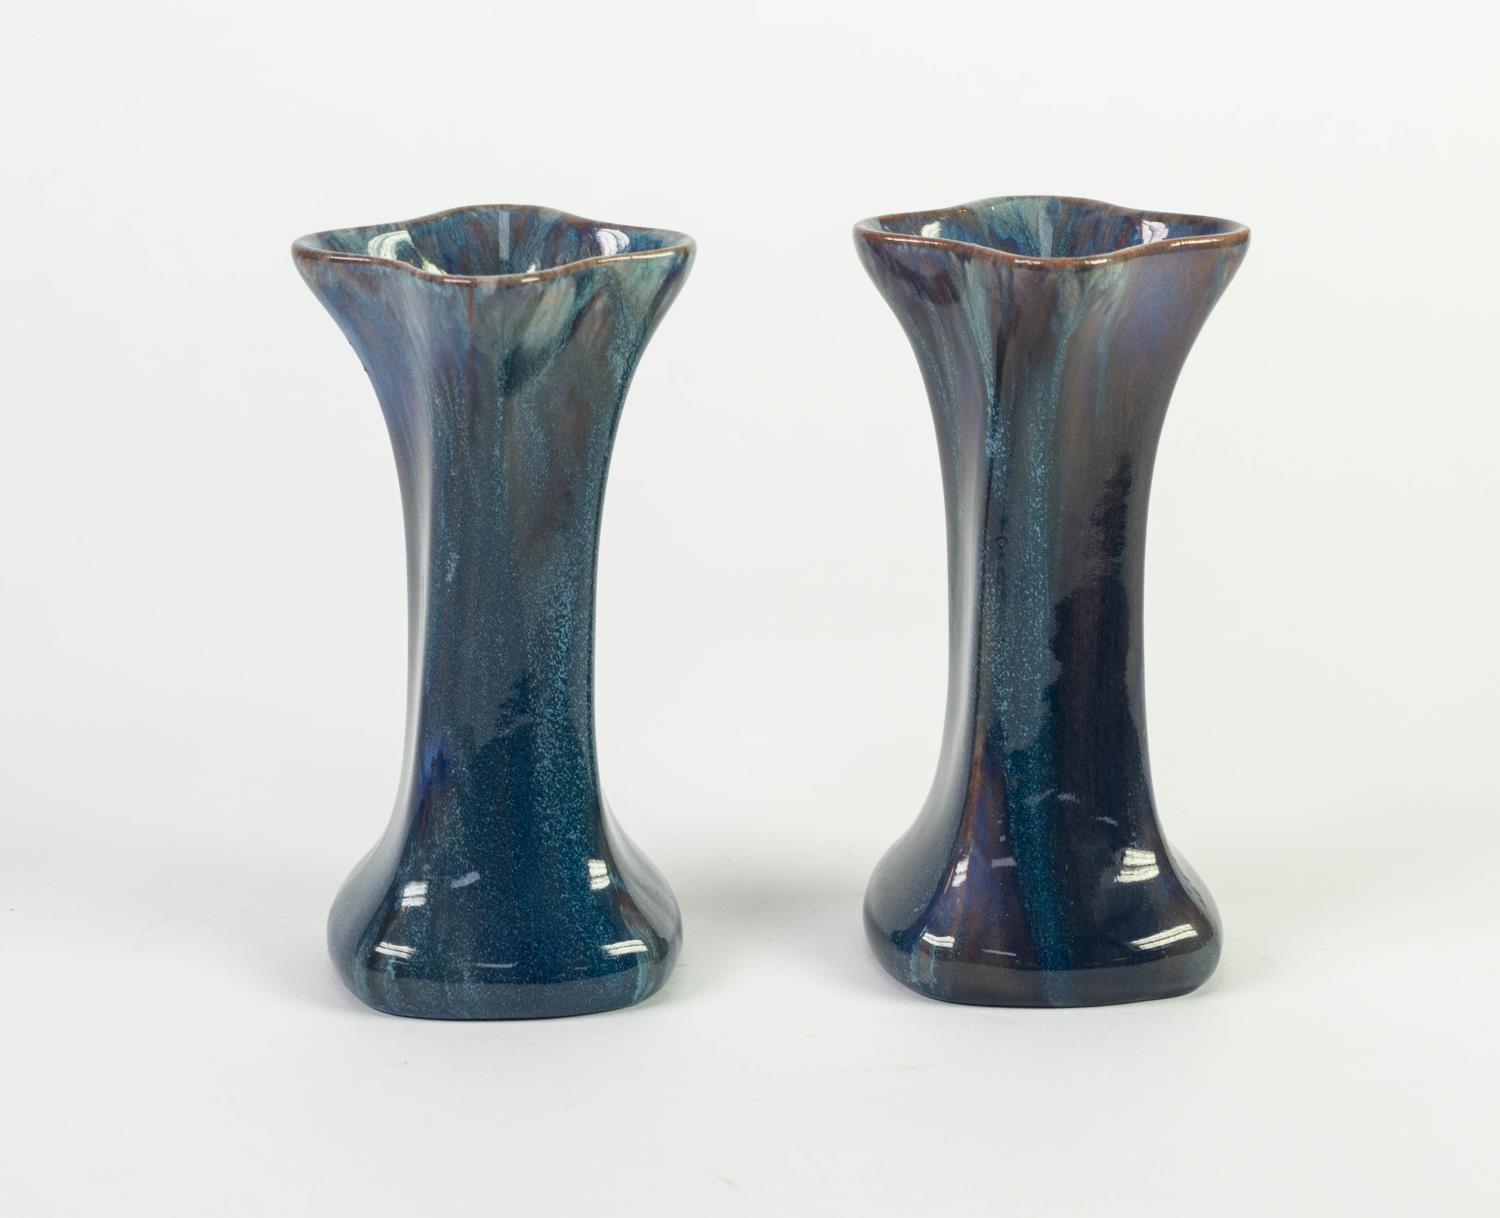 PAIR OF PILKINGTONS BLUE VEINED OPALESCENT GLAZED POTTERY VASES, each of square, twisted form with